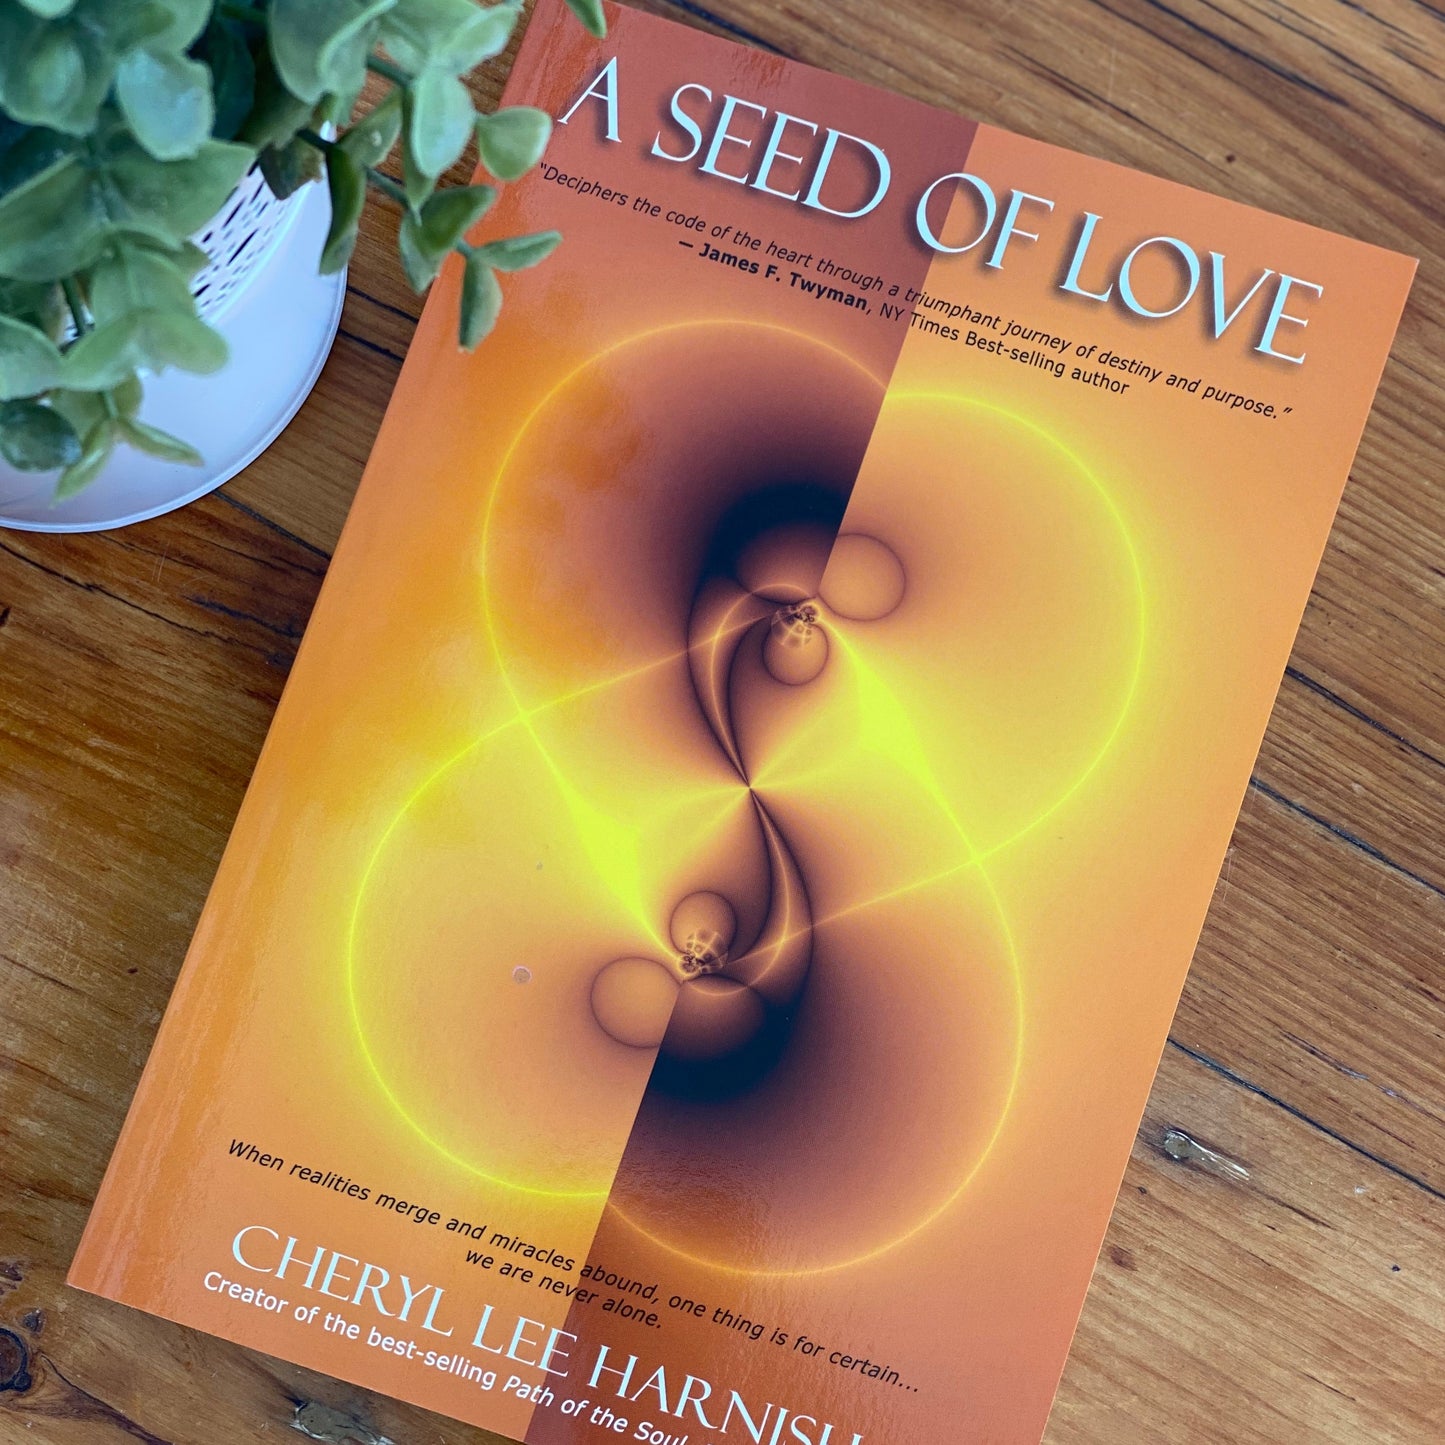 A seed of love